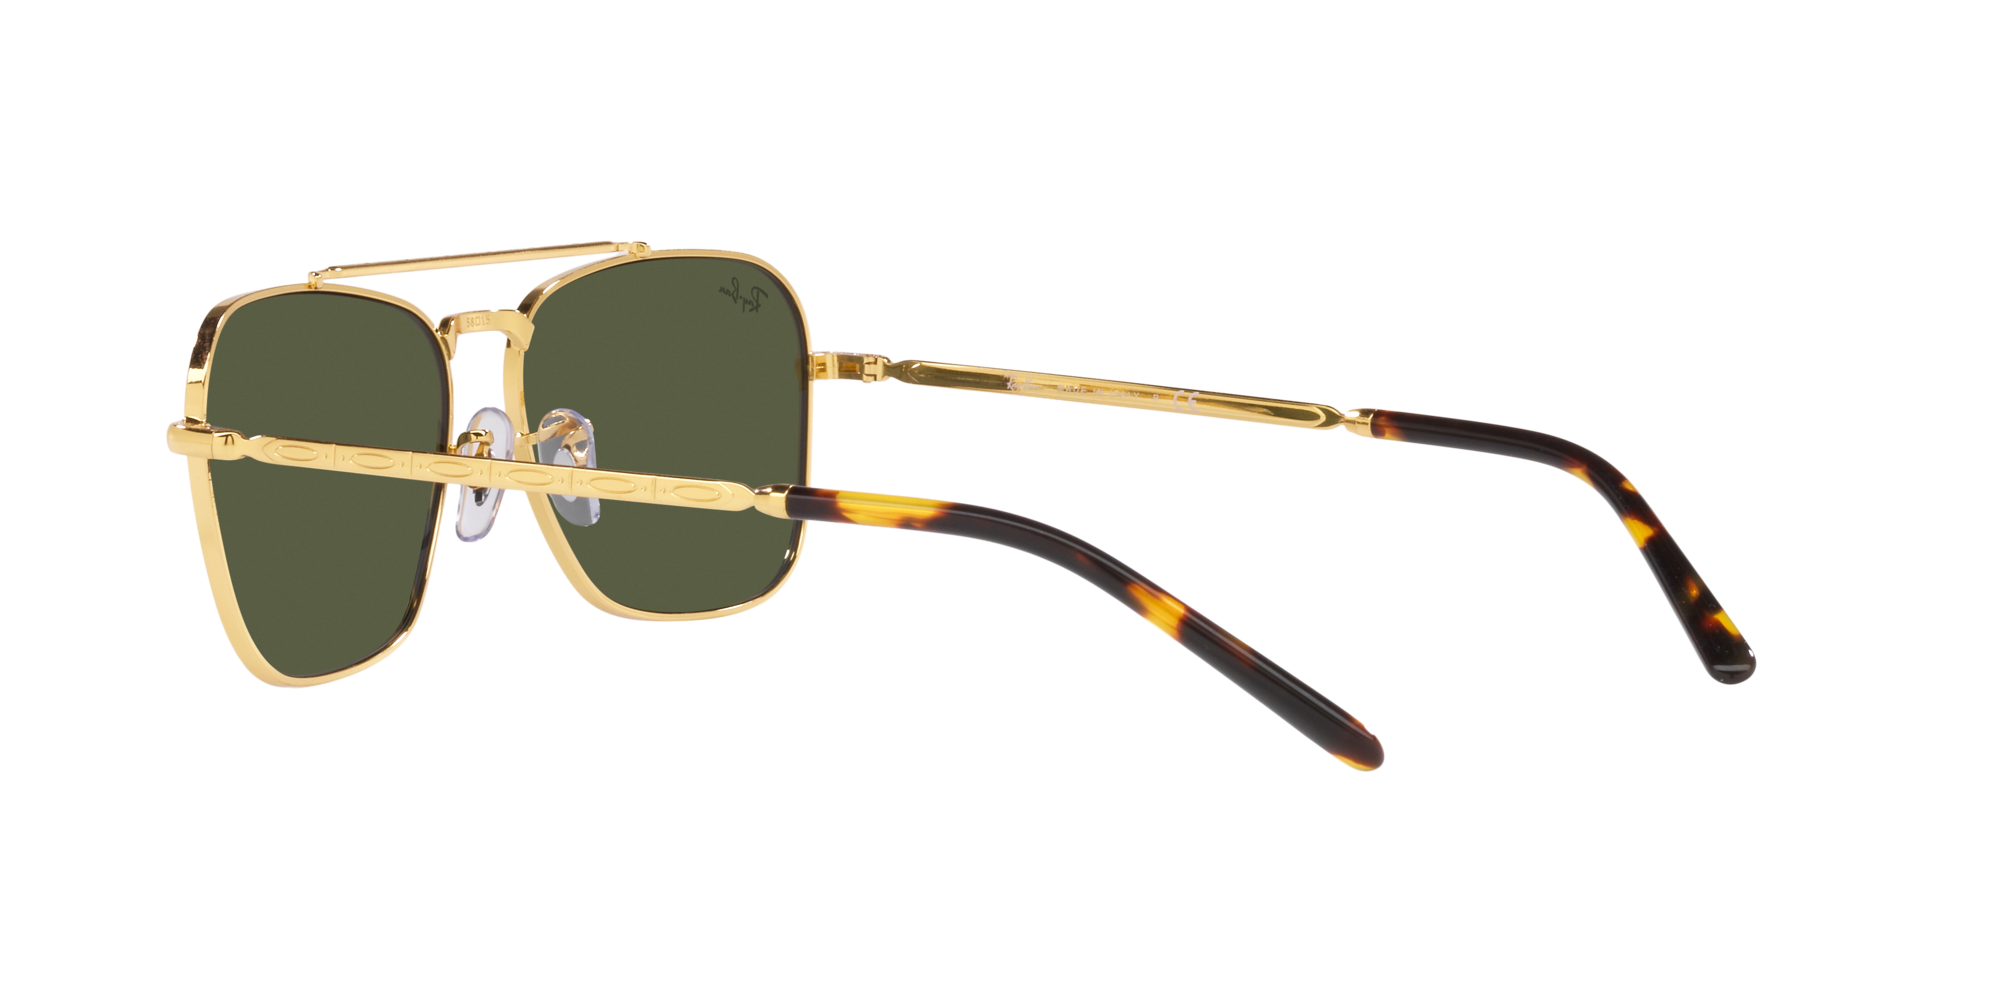 New Caravan Ray Ban Unisex Sonnenbrille in Gold RB3636 919631 58